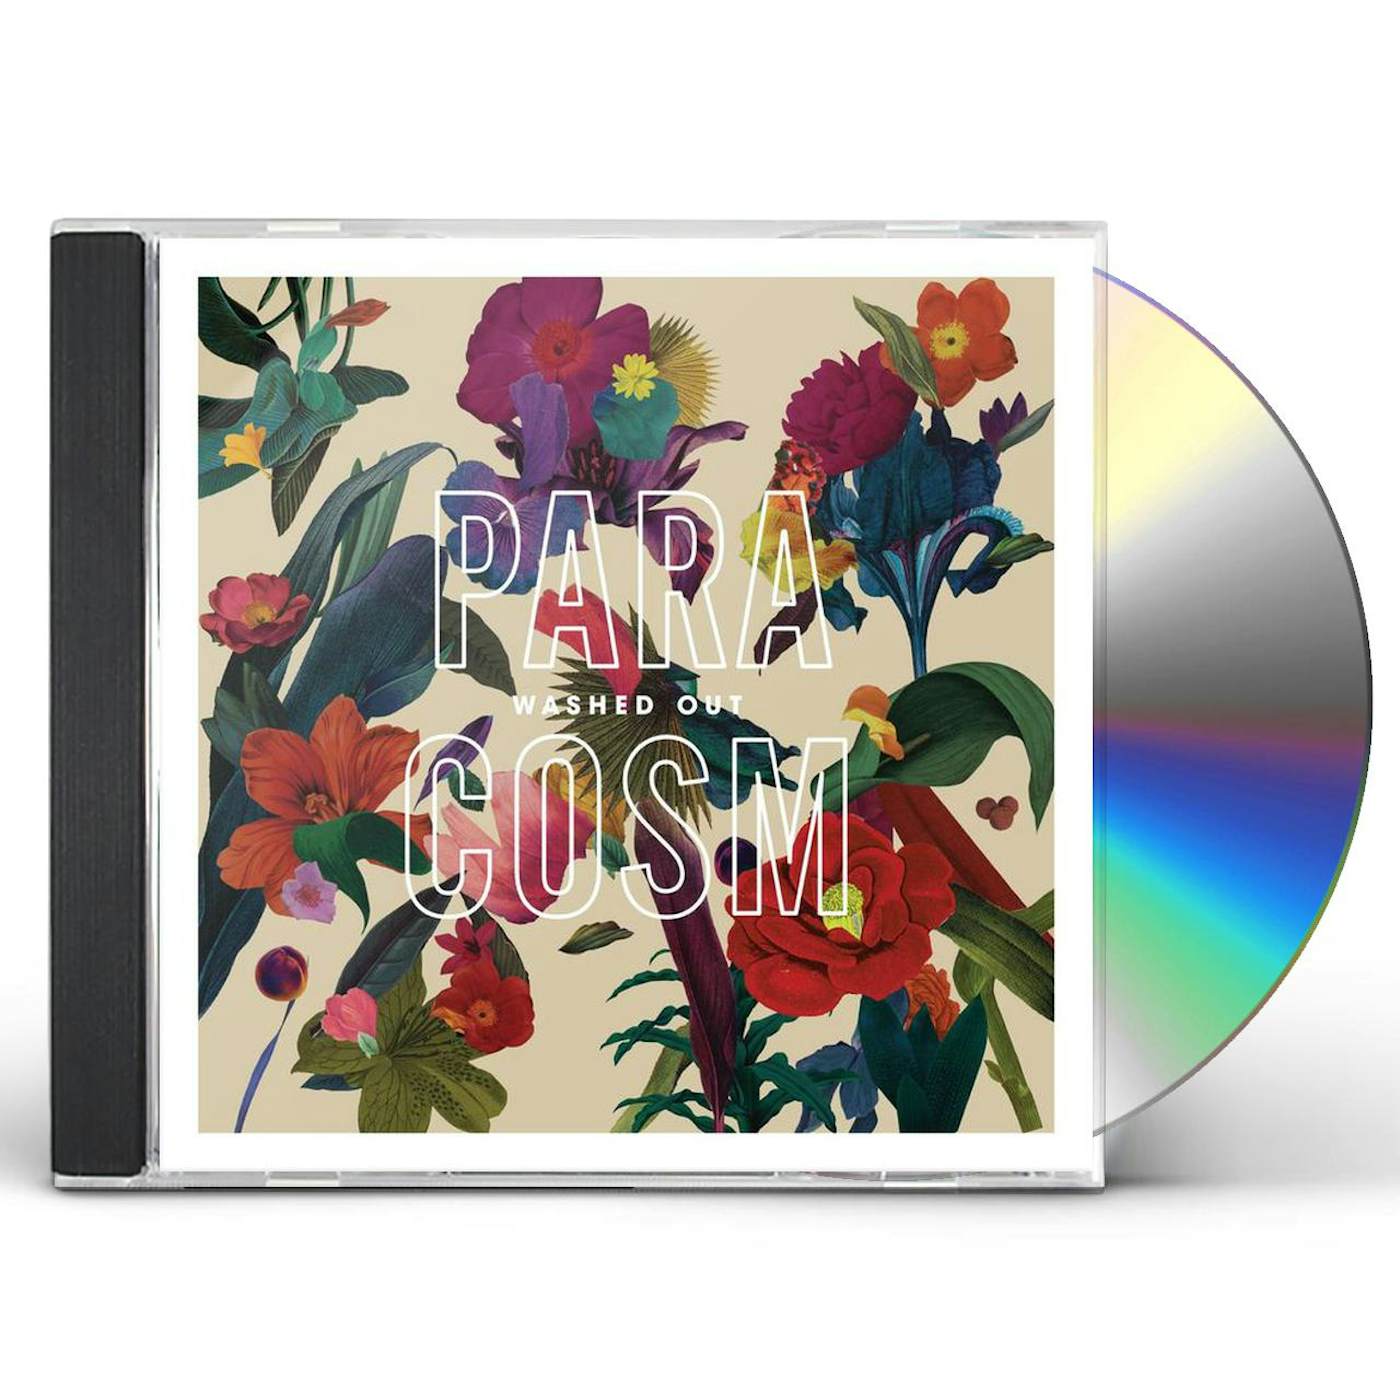 Washed Out PARACOSM CD